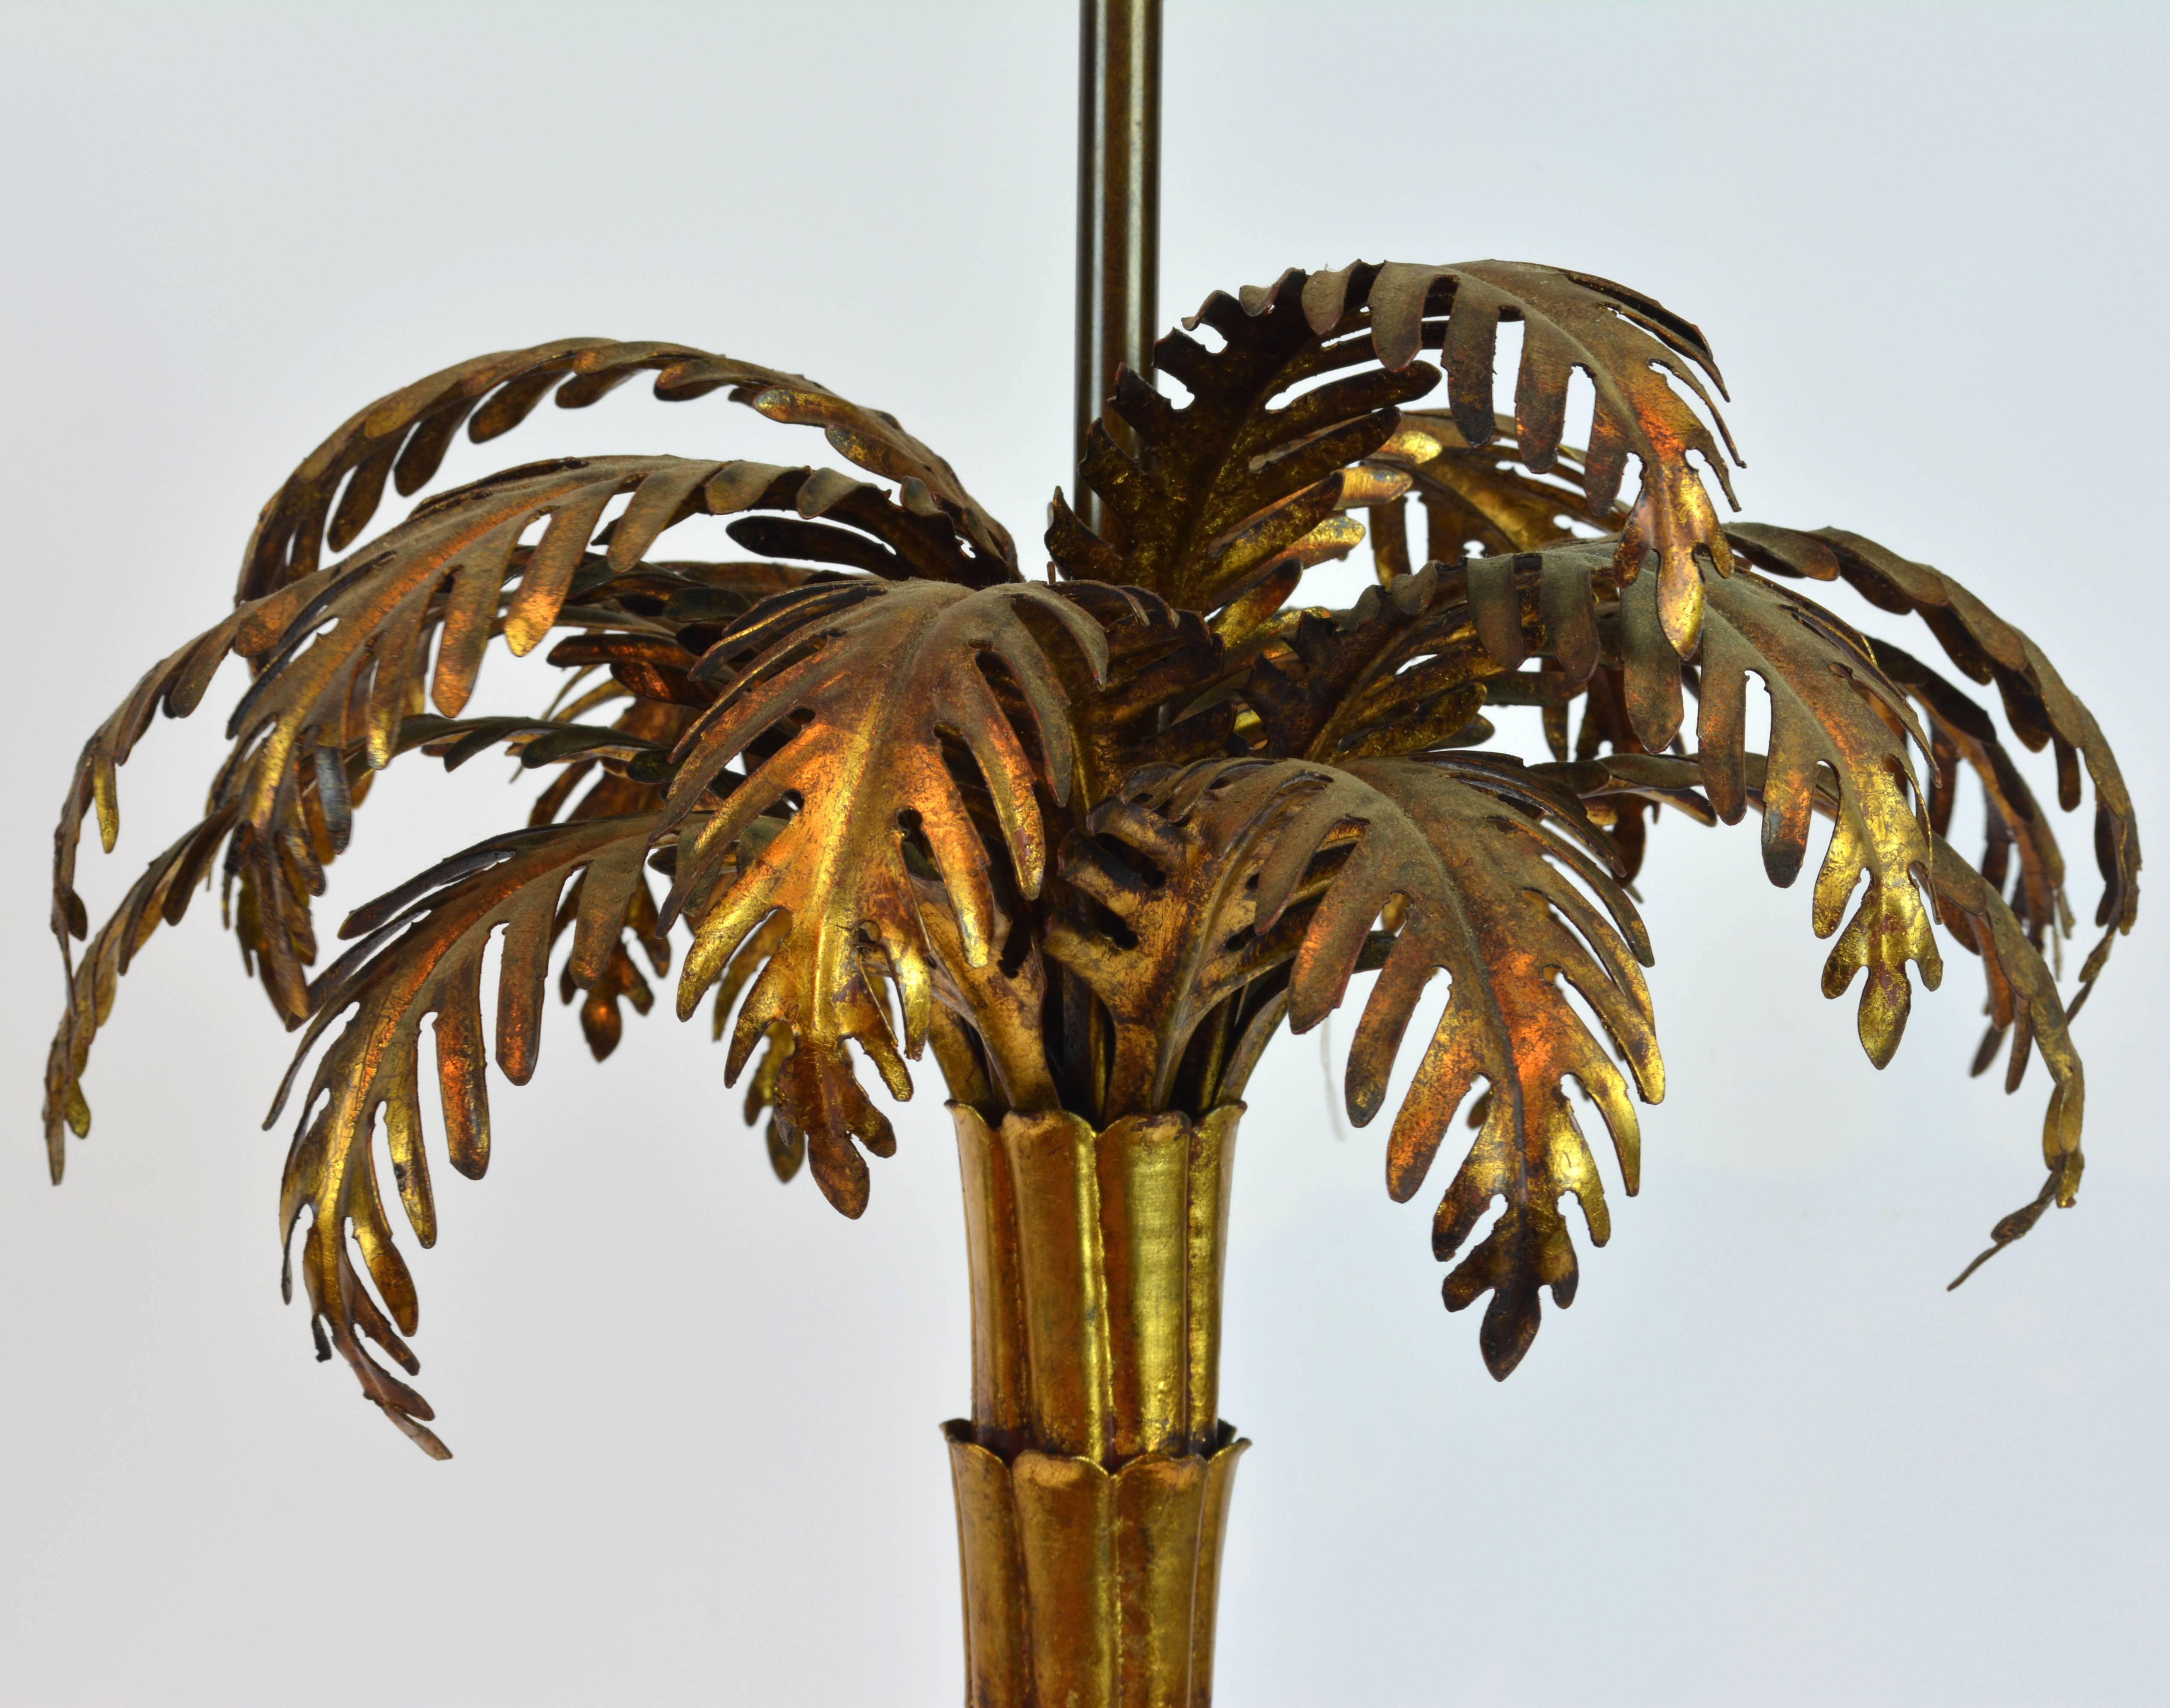 Standing 28 inches tall as shown this large sculptural lamp features a detailed modeled palm frond above a section designed stem ending in a circular base. Everything is fashioned in gilt metal with great patina.